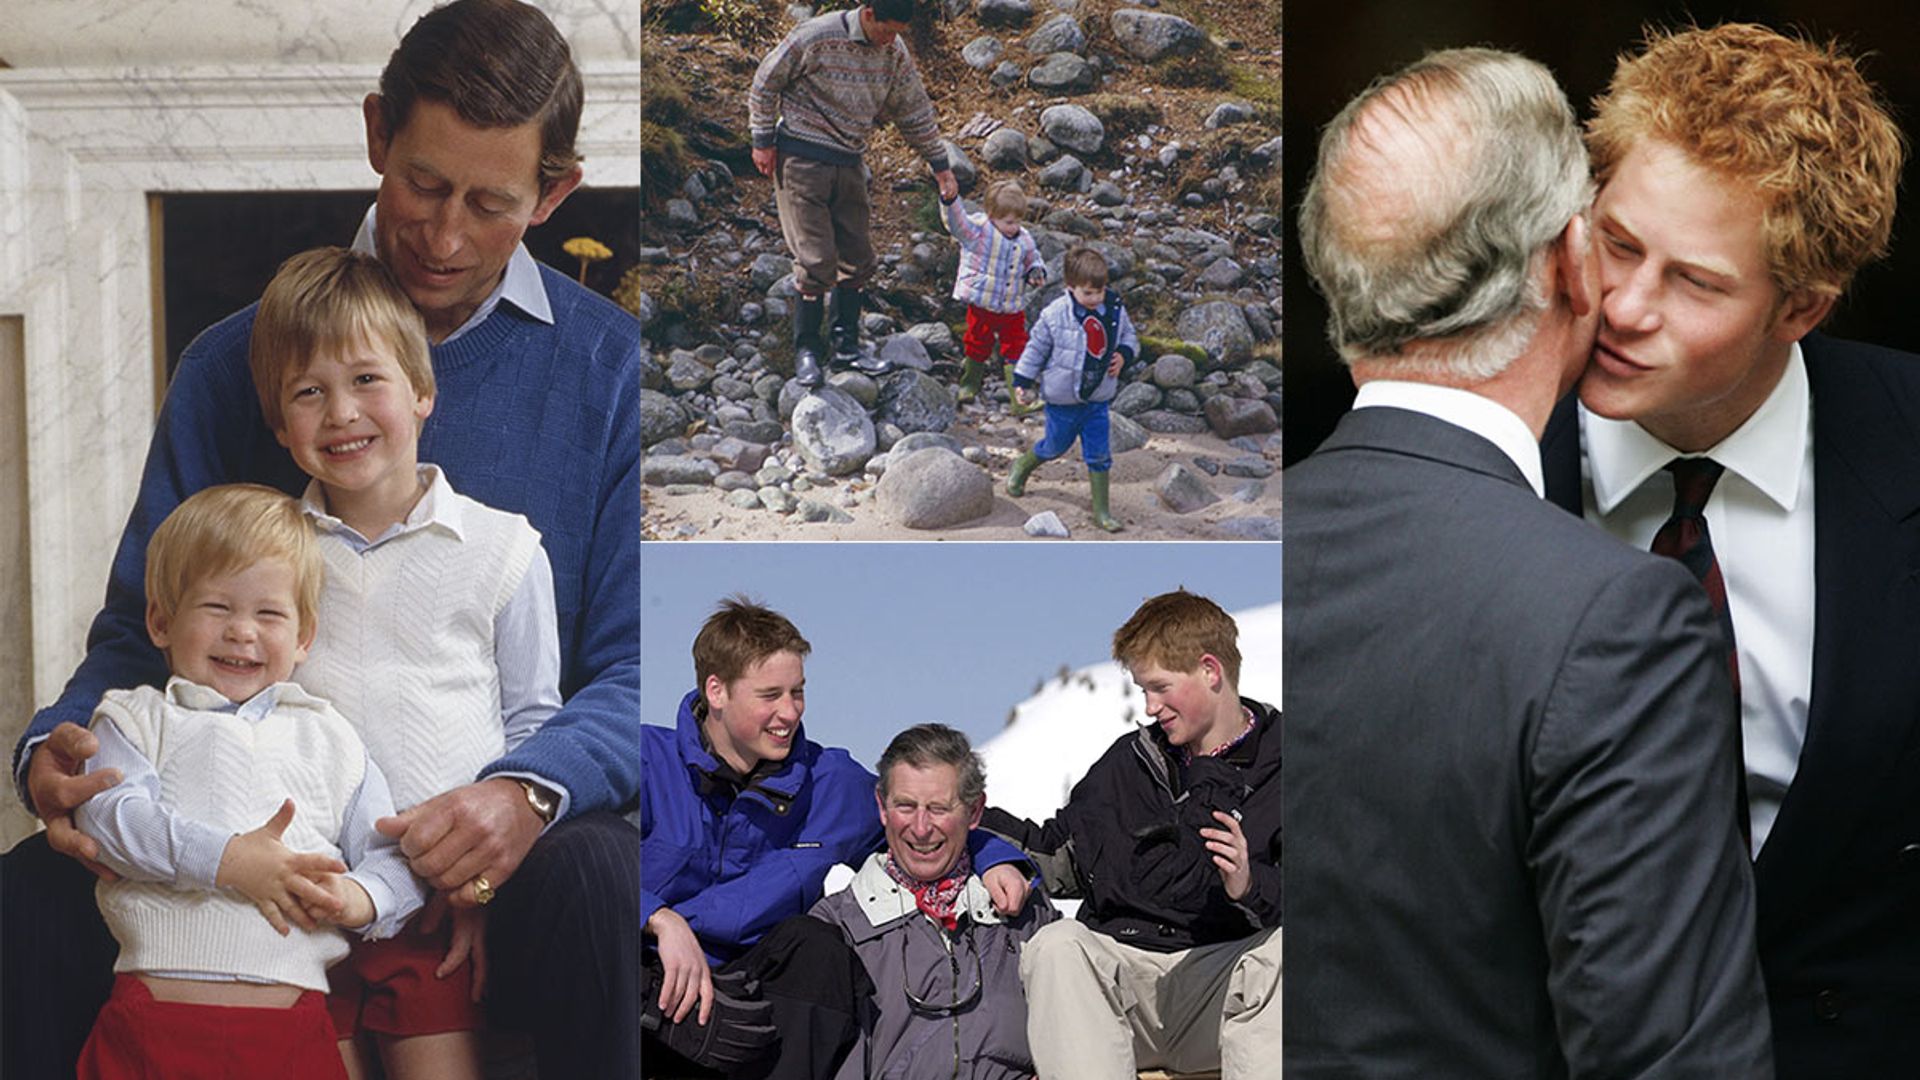 16 photos that show Prince Charles' close fatherly bond with his sons